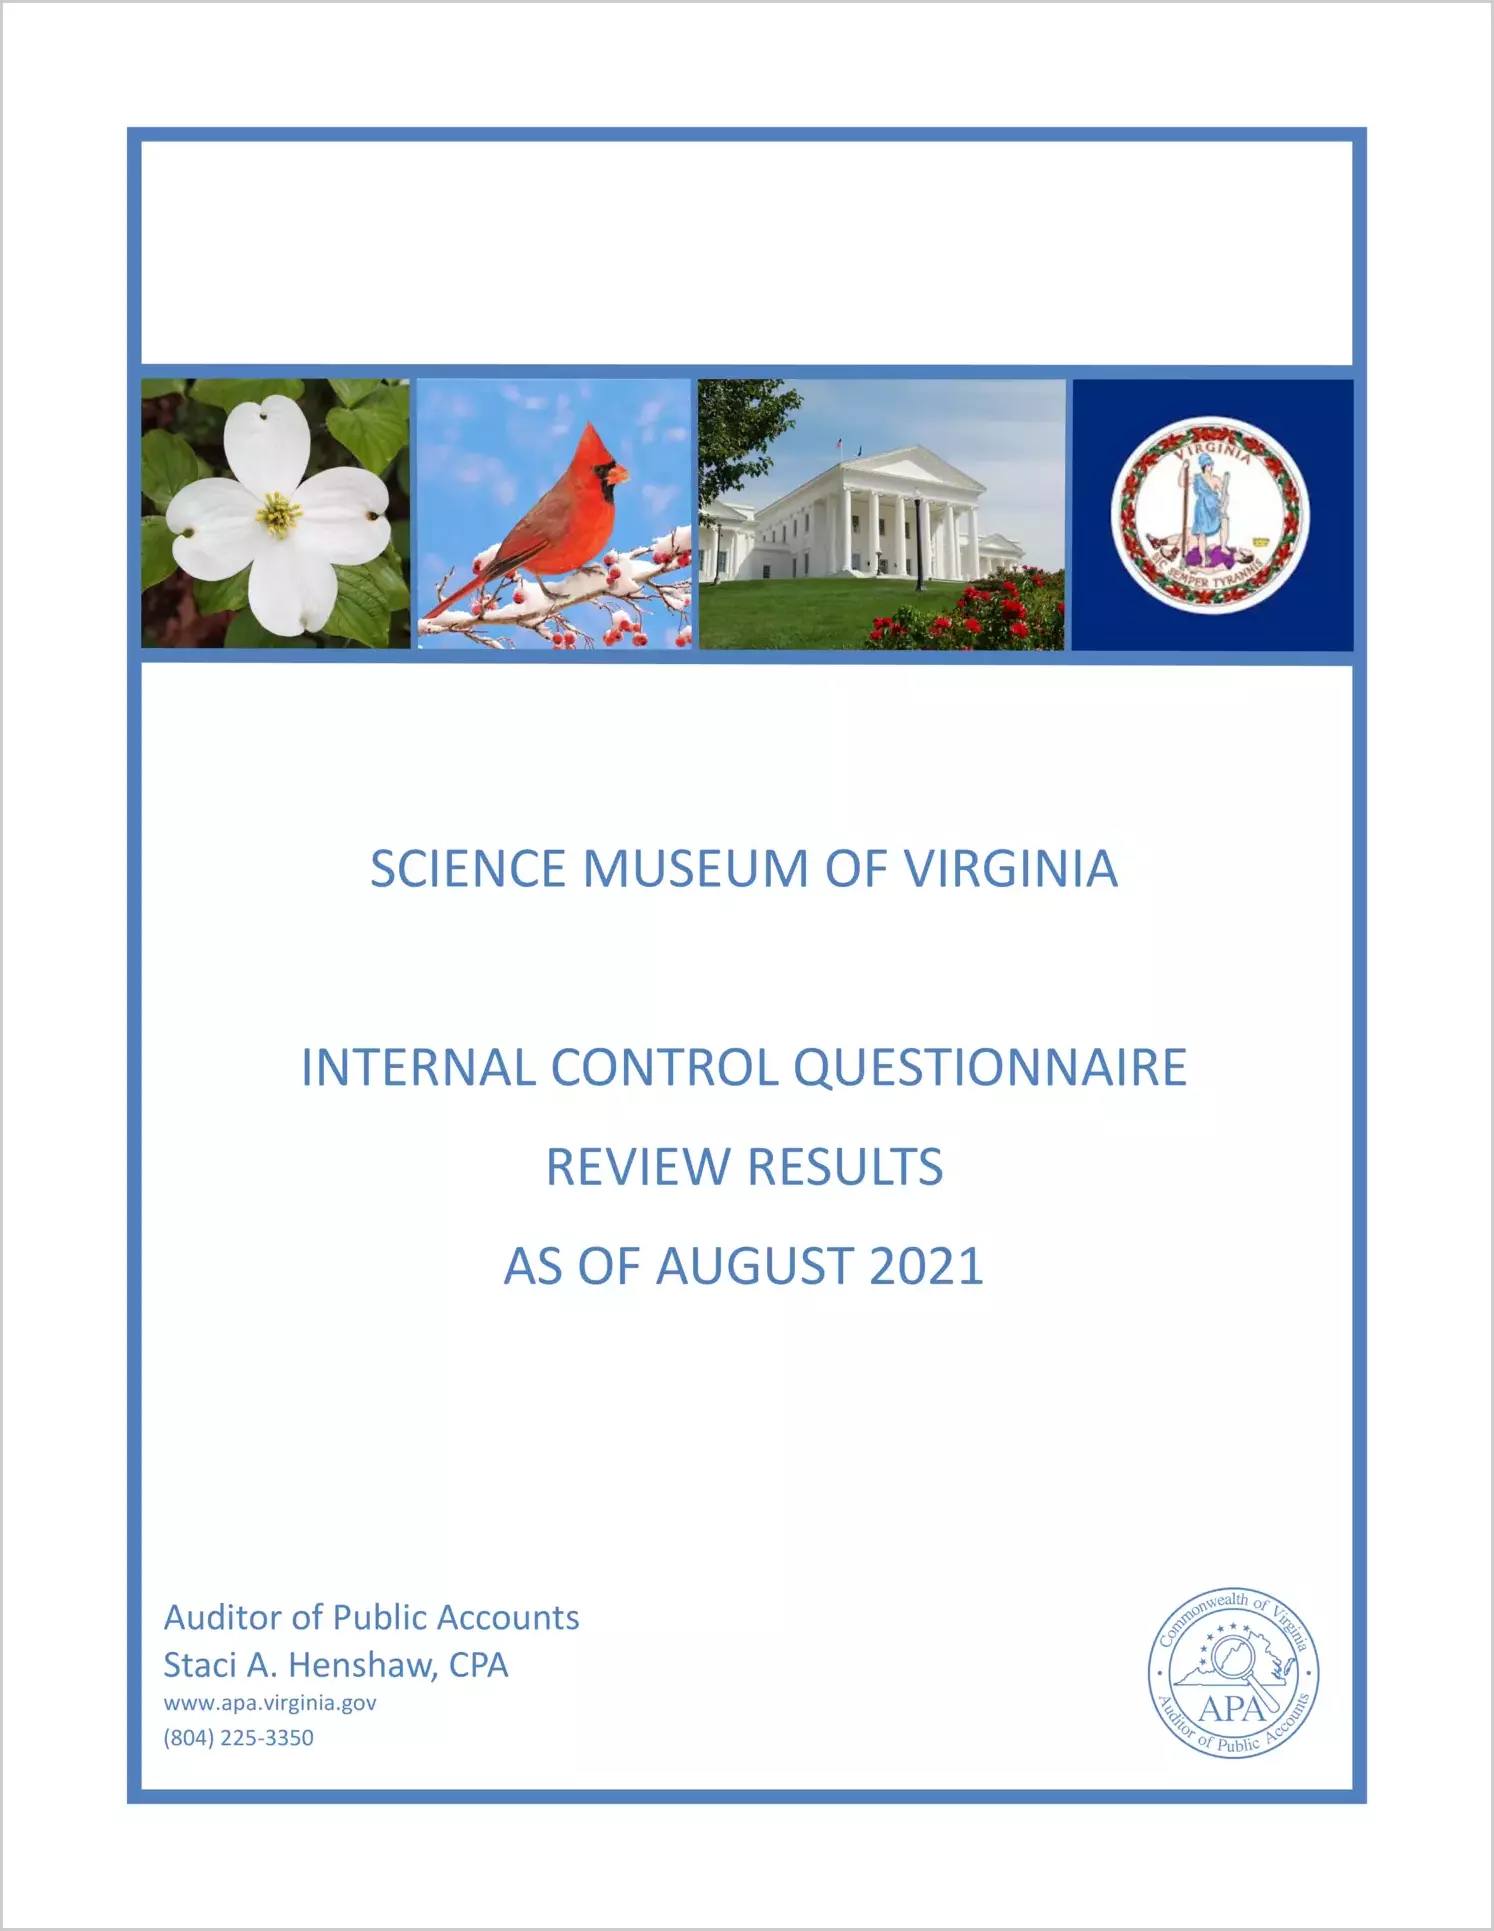 Science Museum of Virginia Internal Control Questionnaire Review Results as of August 2021